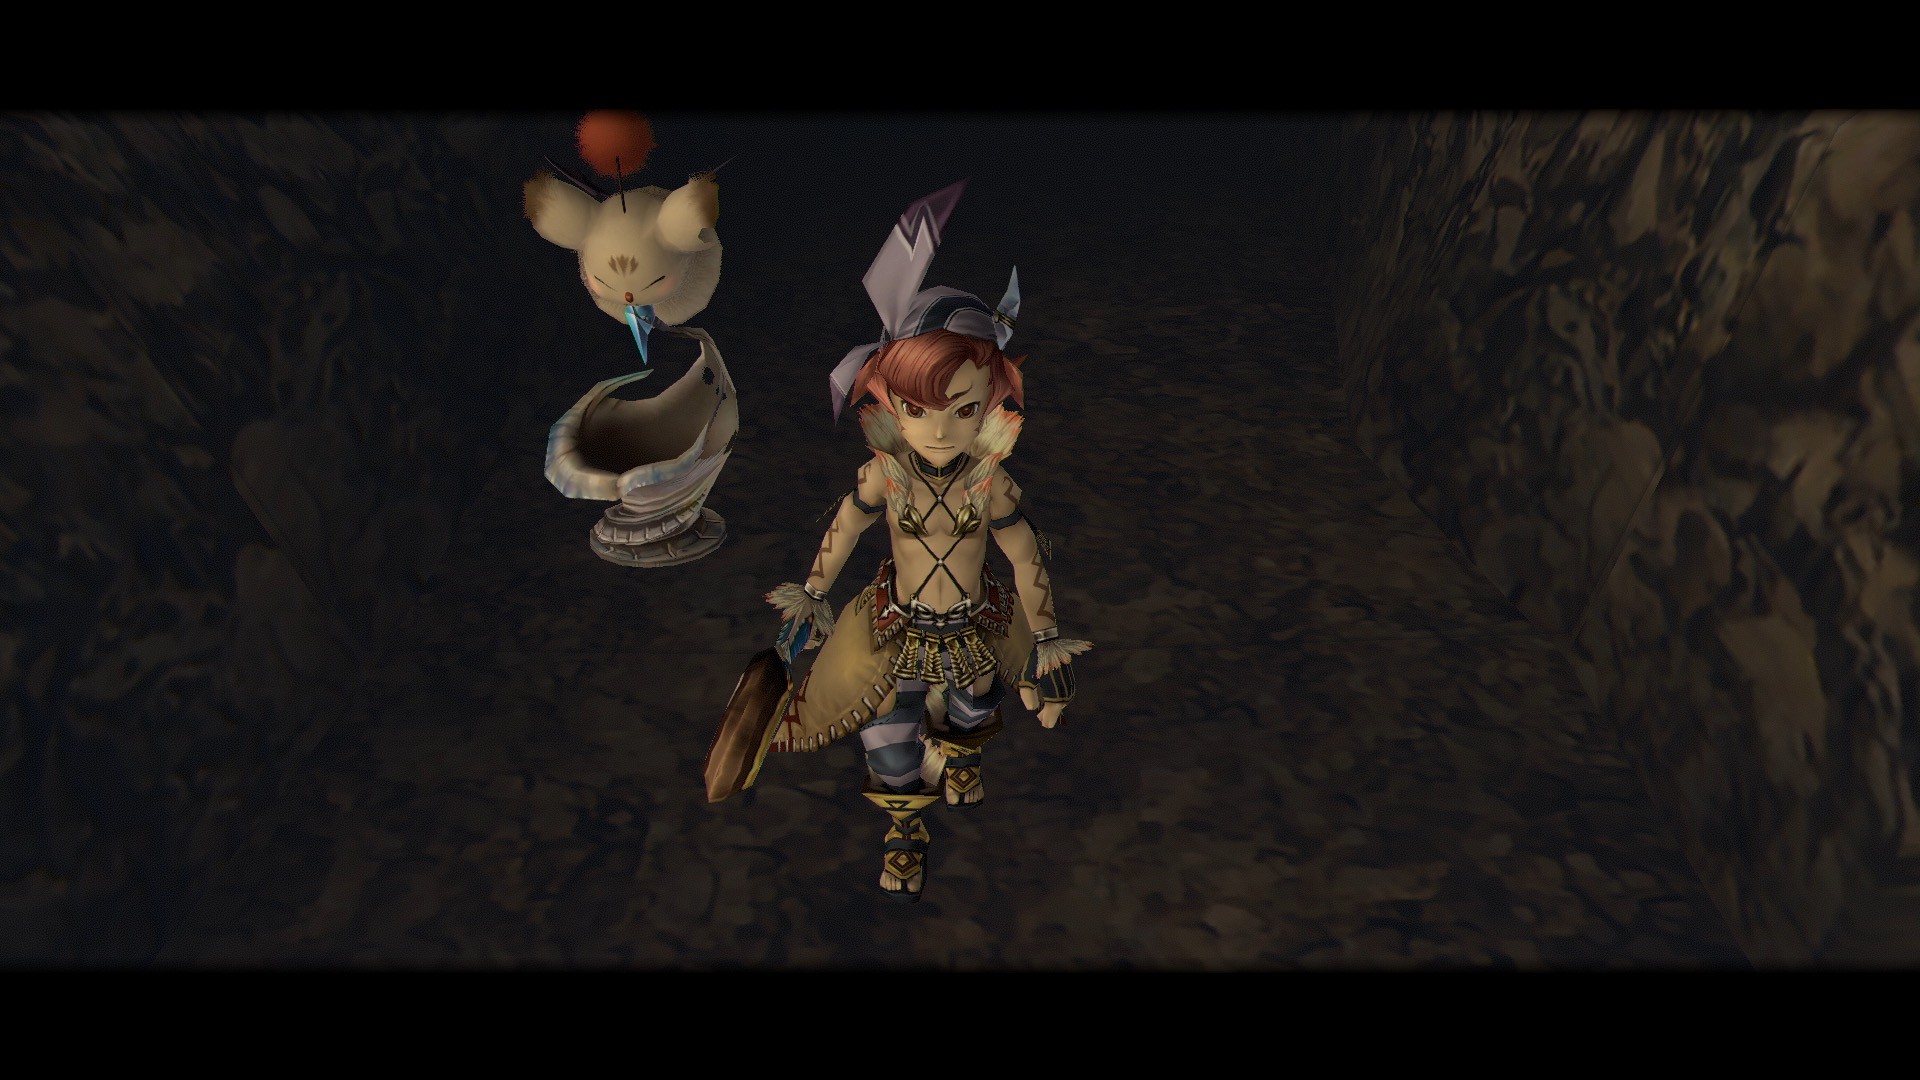 Final Fantasy Crystal Chronicles Remastered Edition on PS4